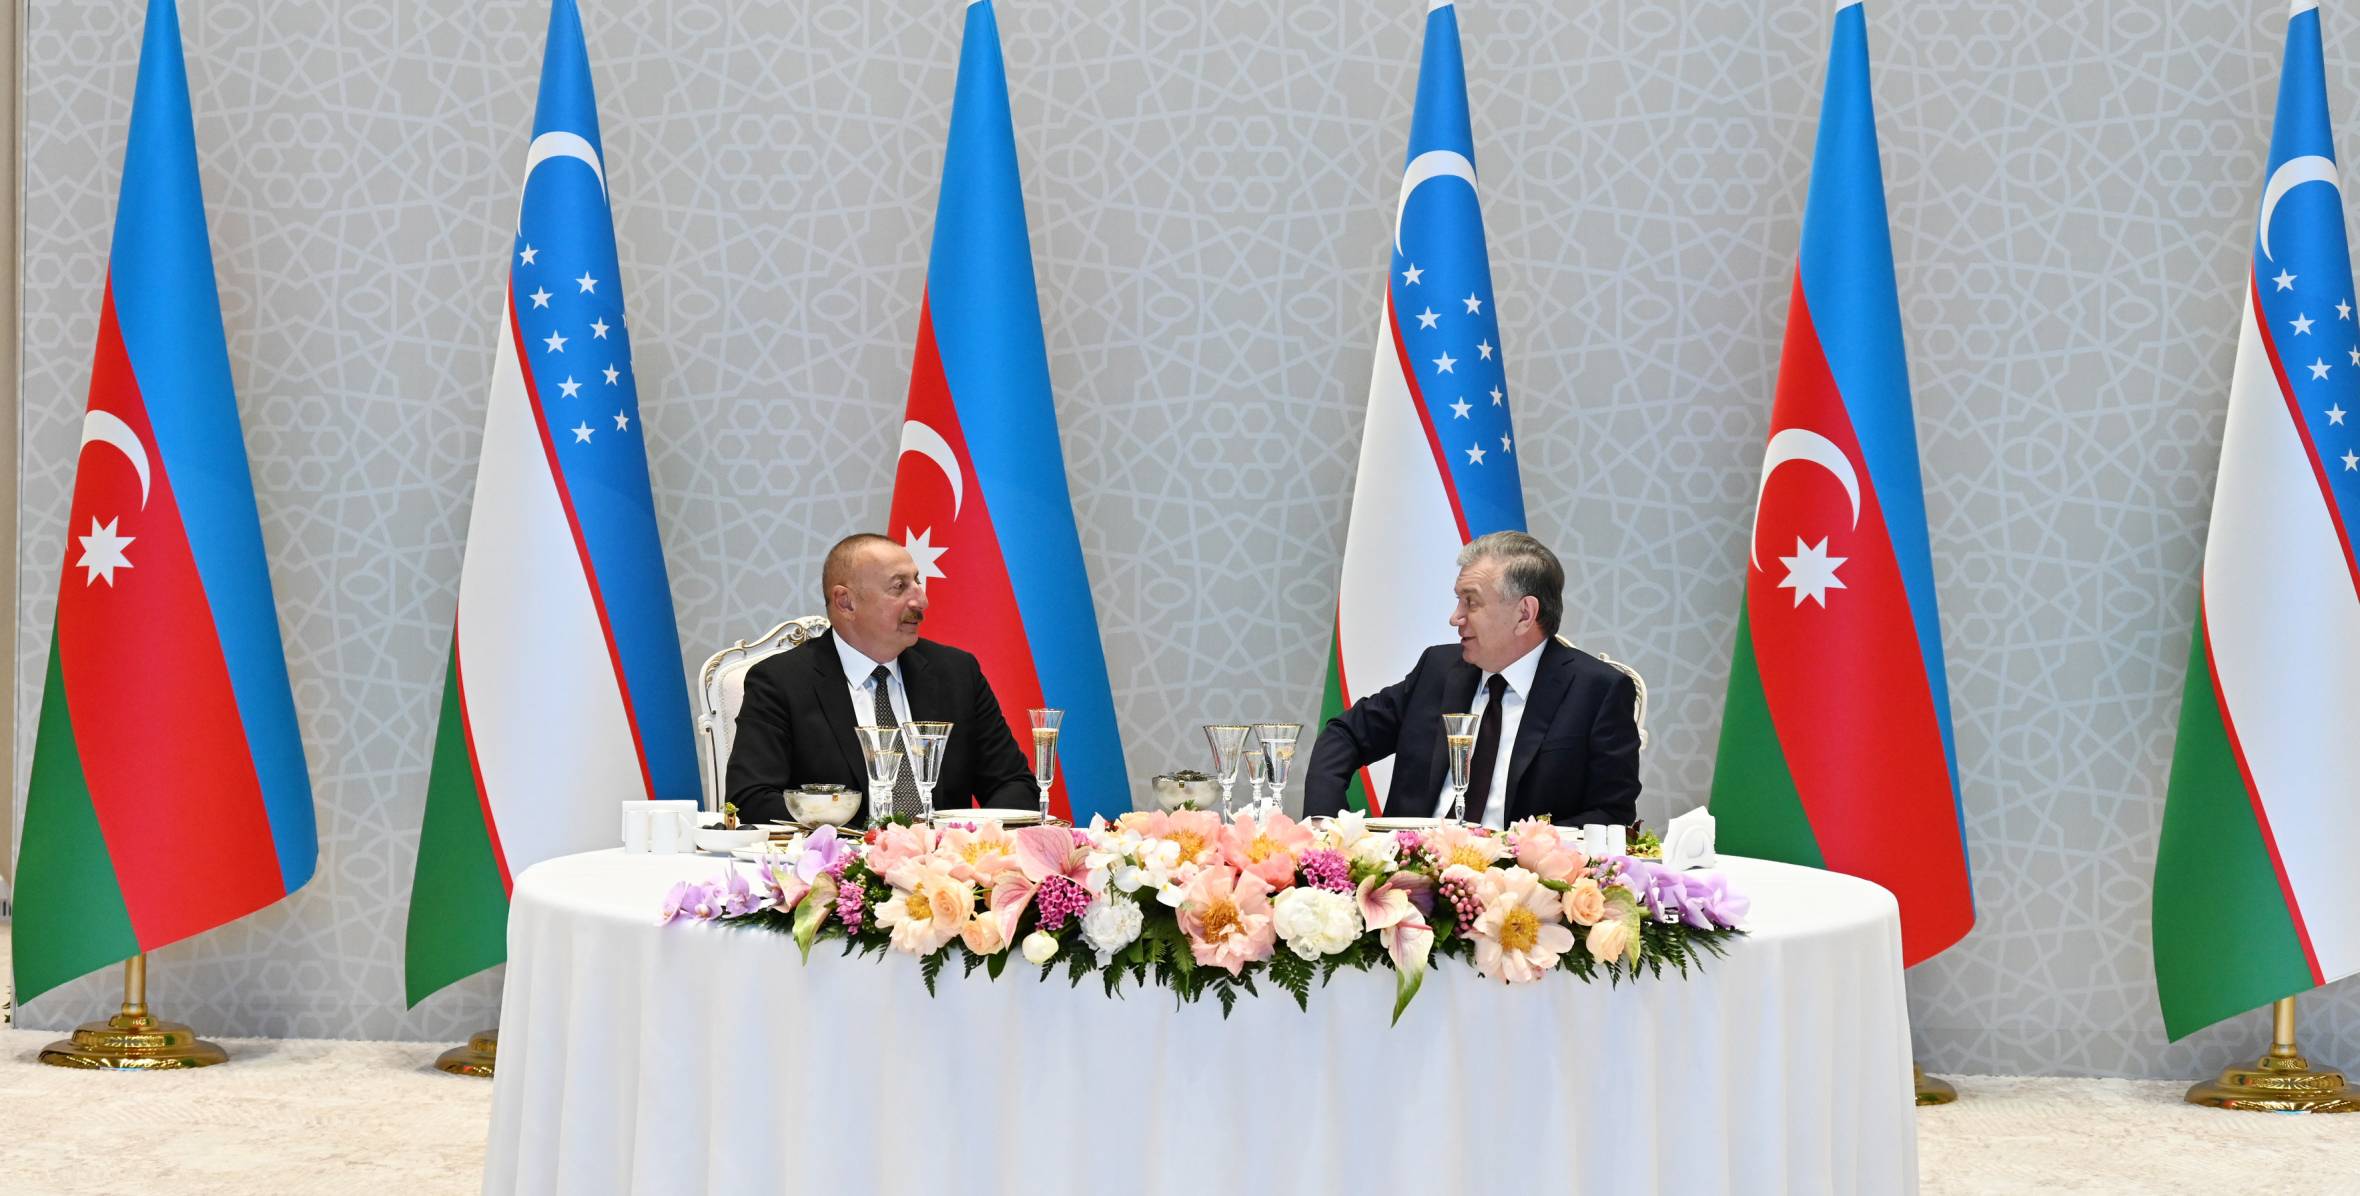 Official dinner was hosted in honor of President Ilham Aliyev